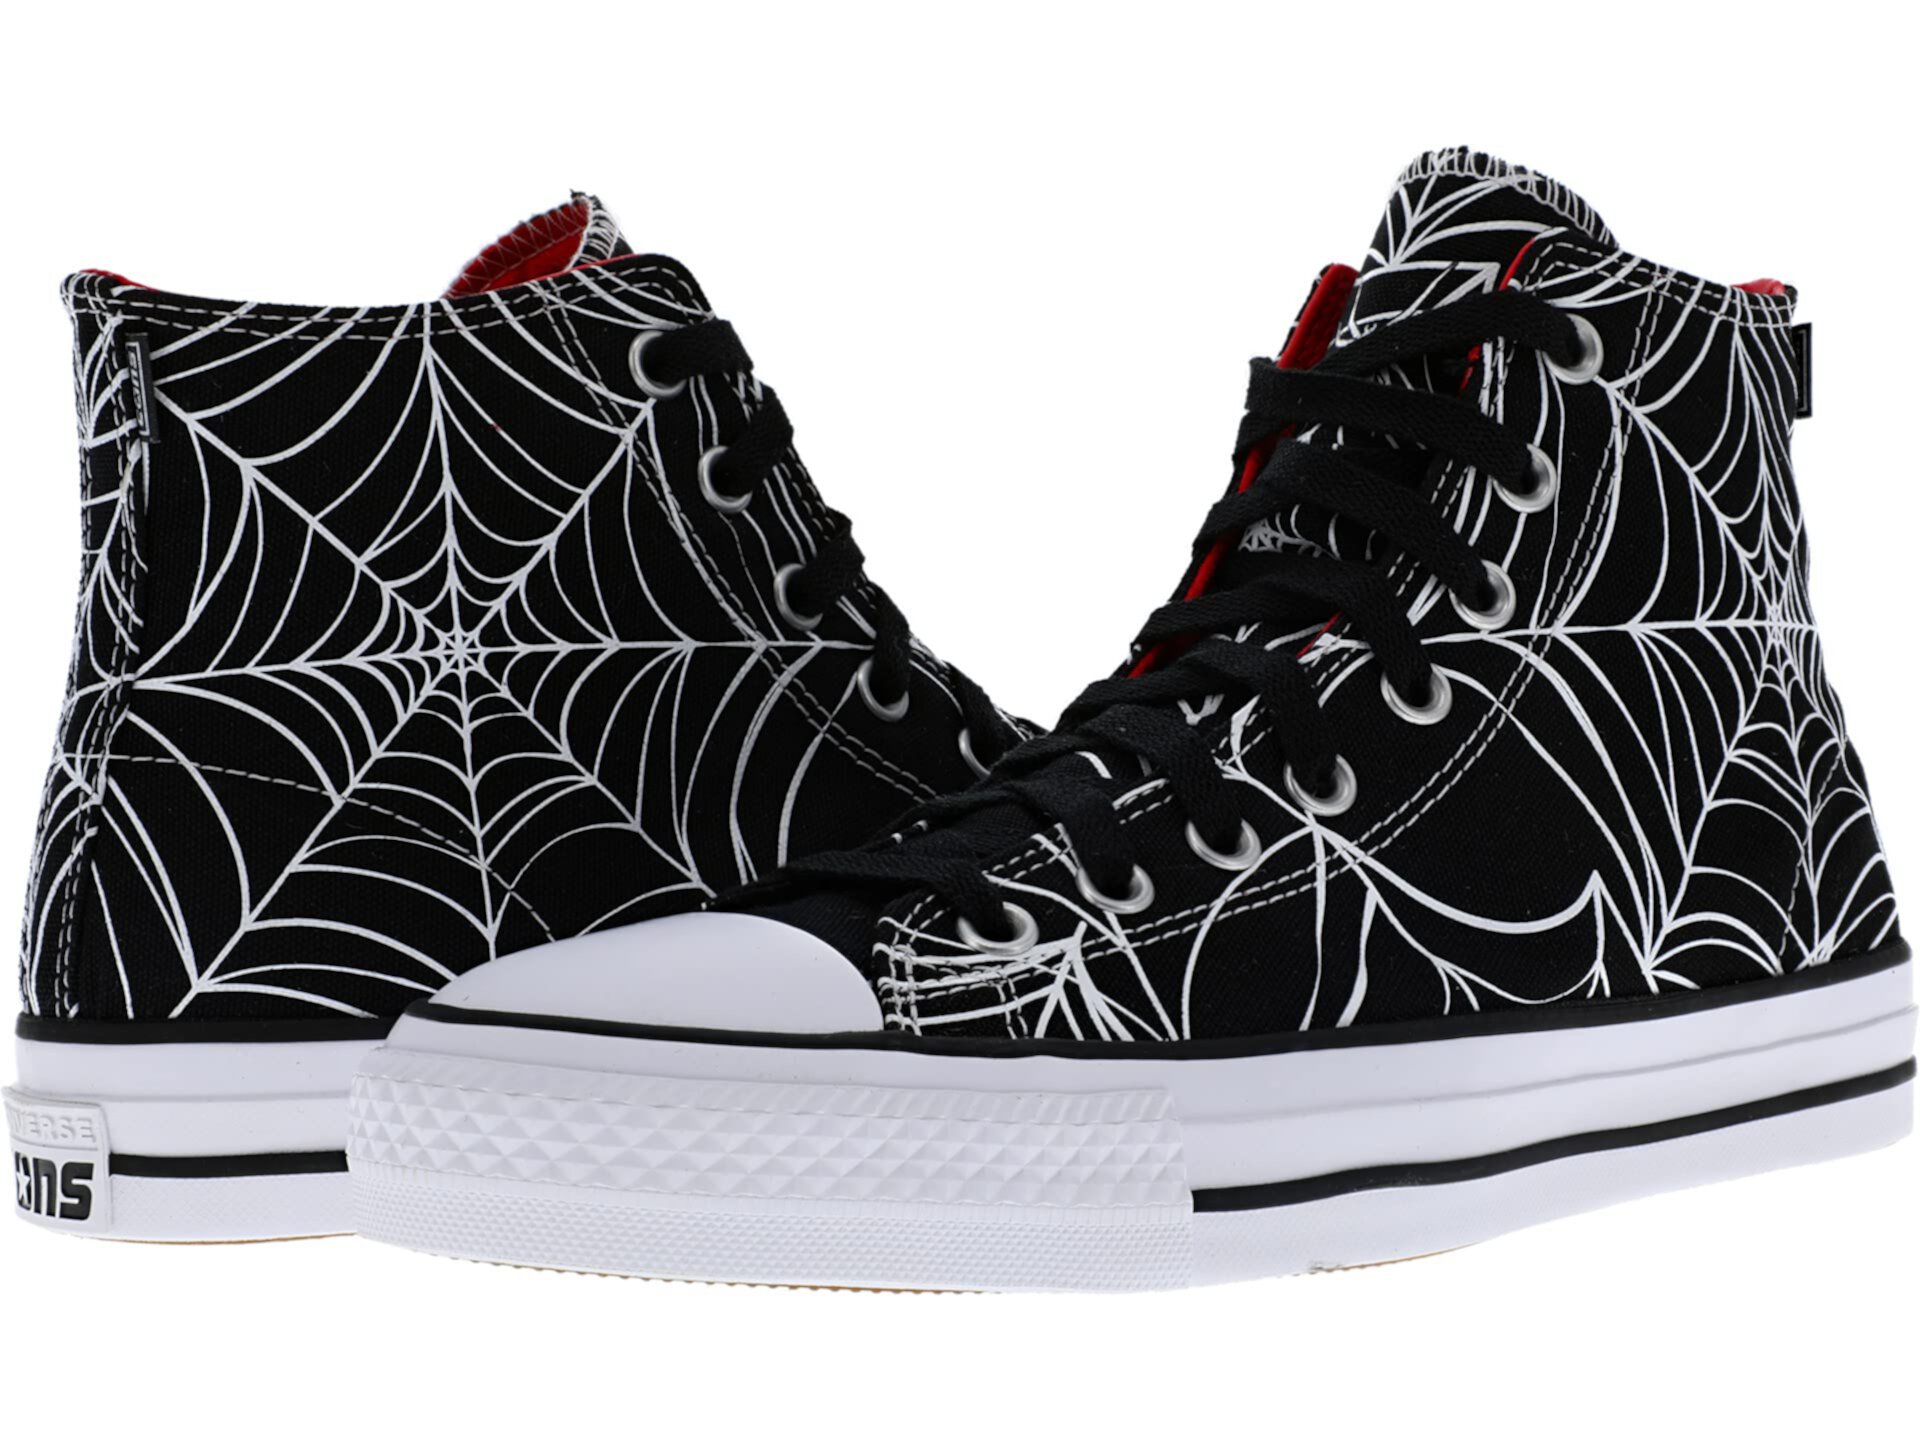 Chuck Taylor All Star Pro White Widow Roll-Up - Hi Converse Skate